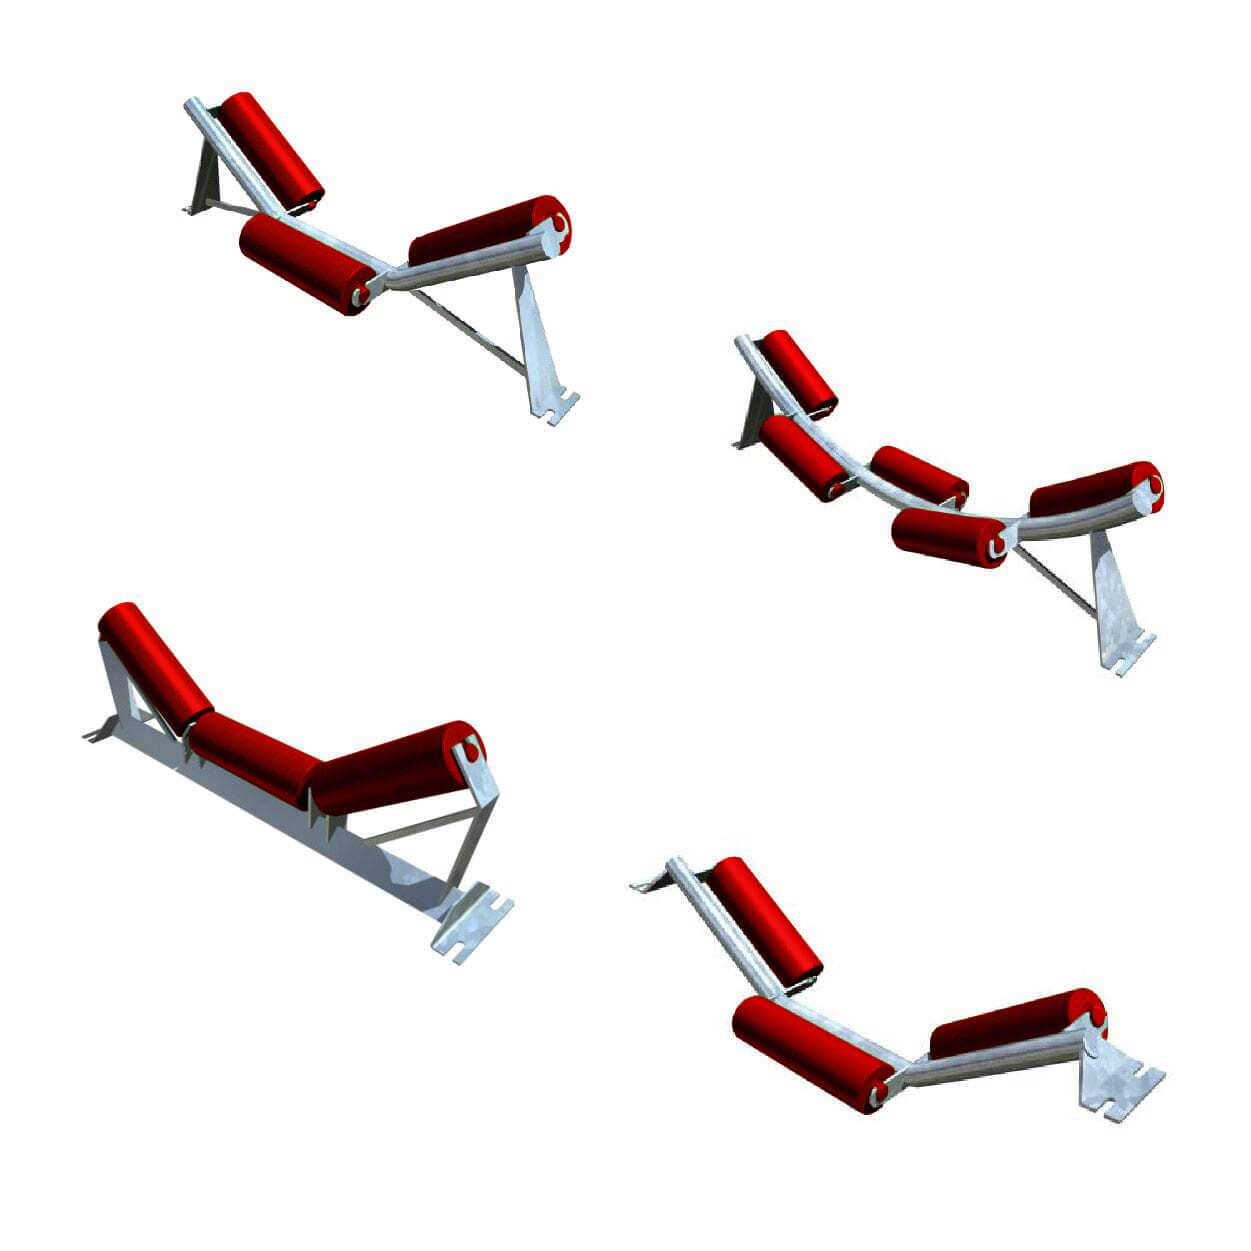 Four images showcase a red and silver roller conveyor system component with integrated troughing idlers from different angles.